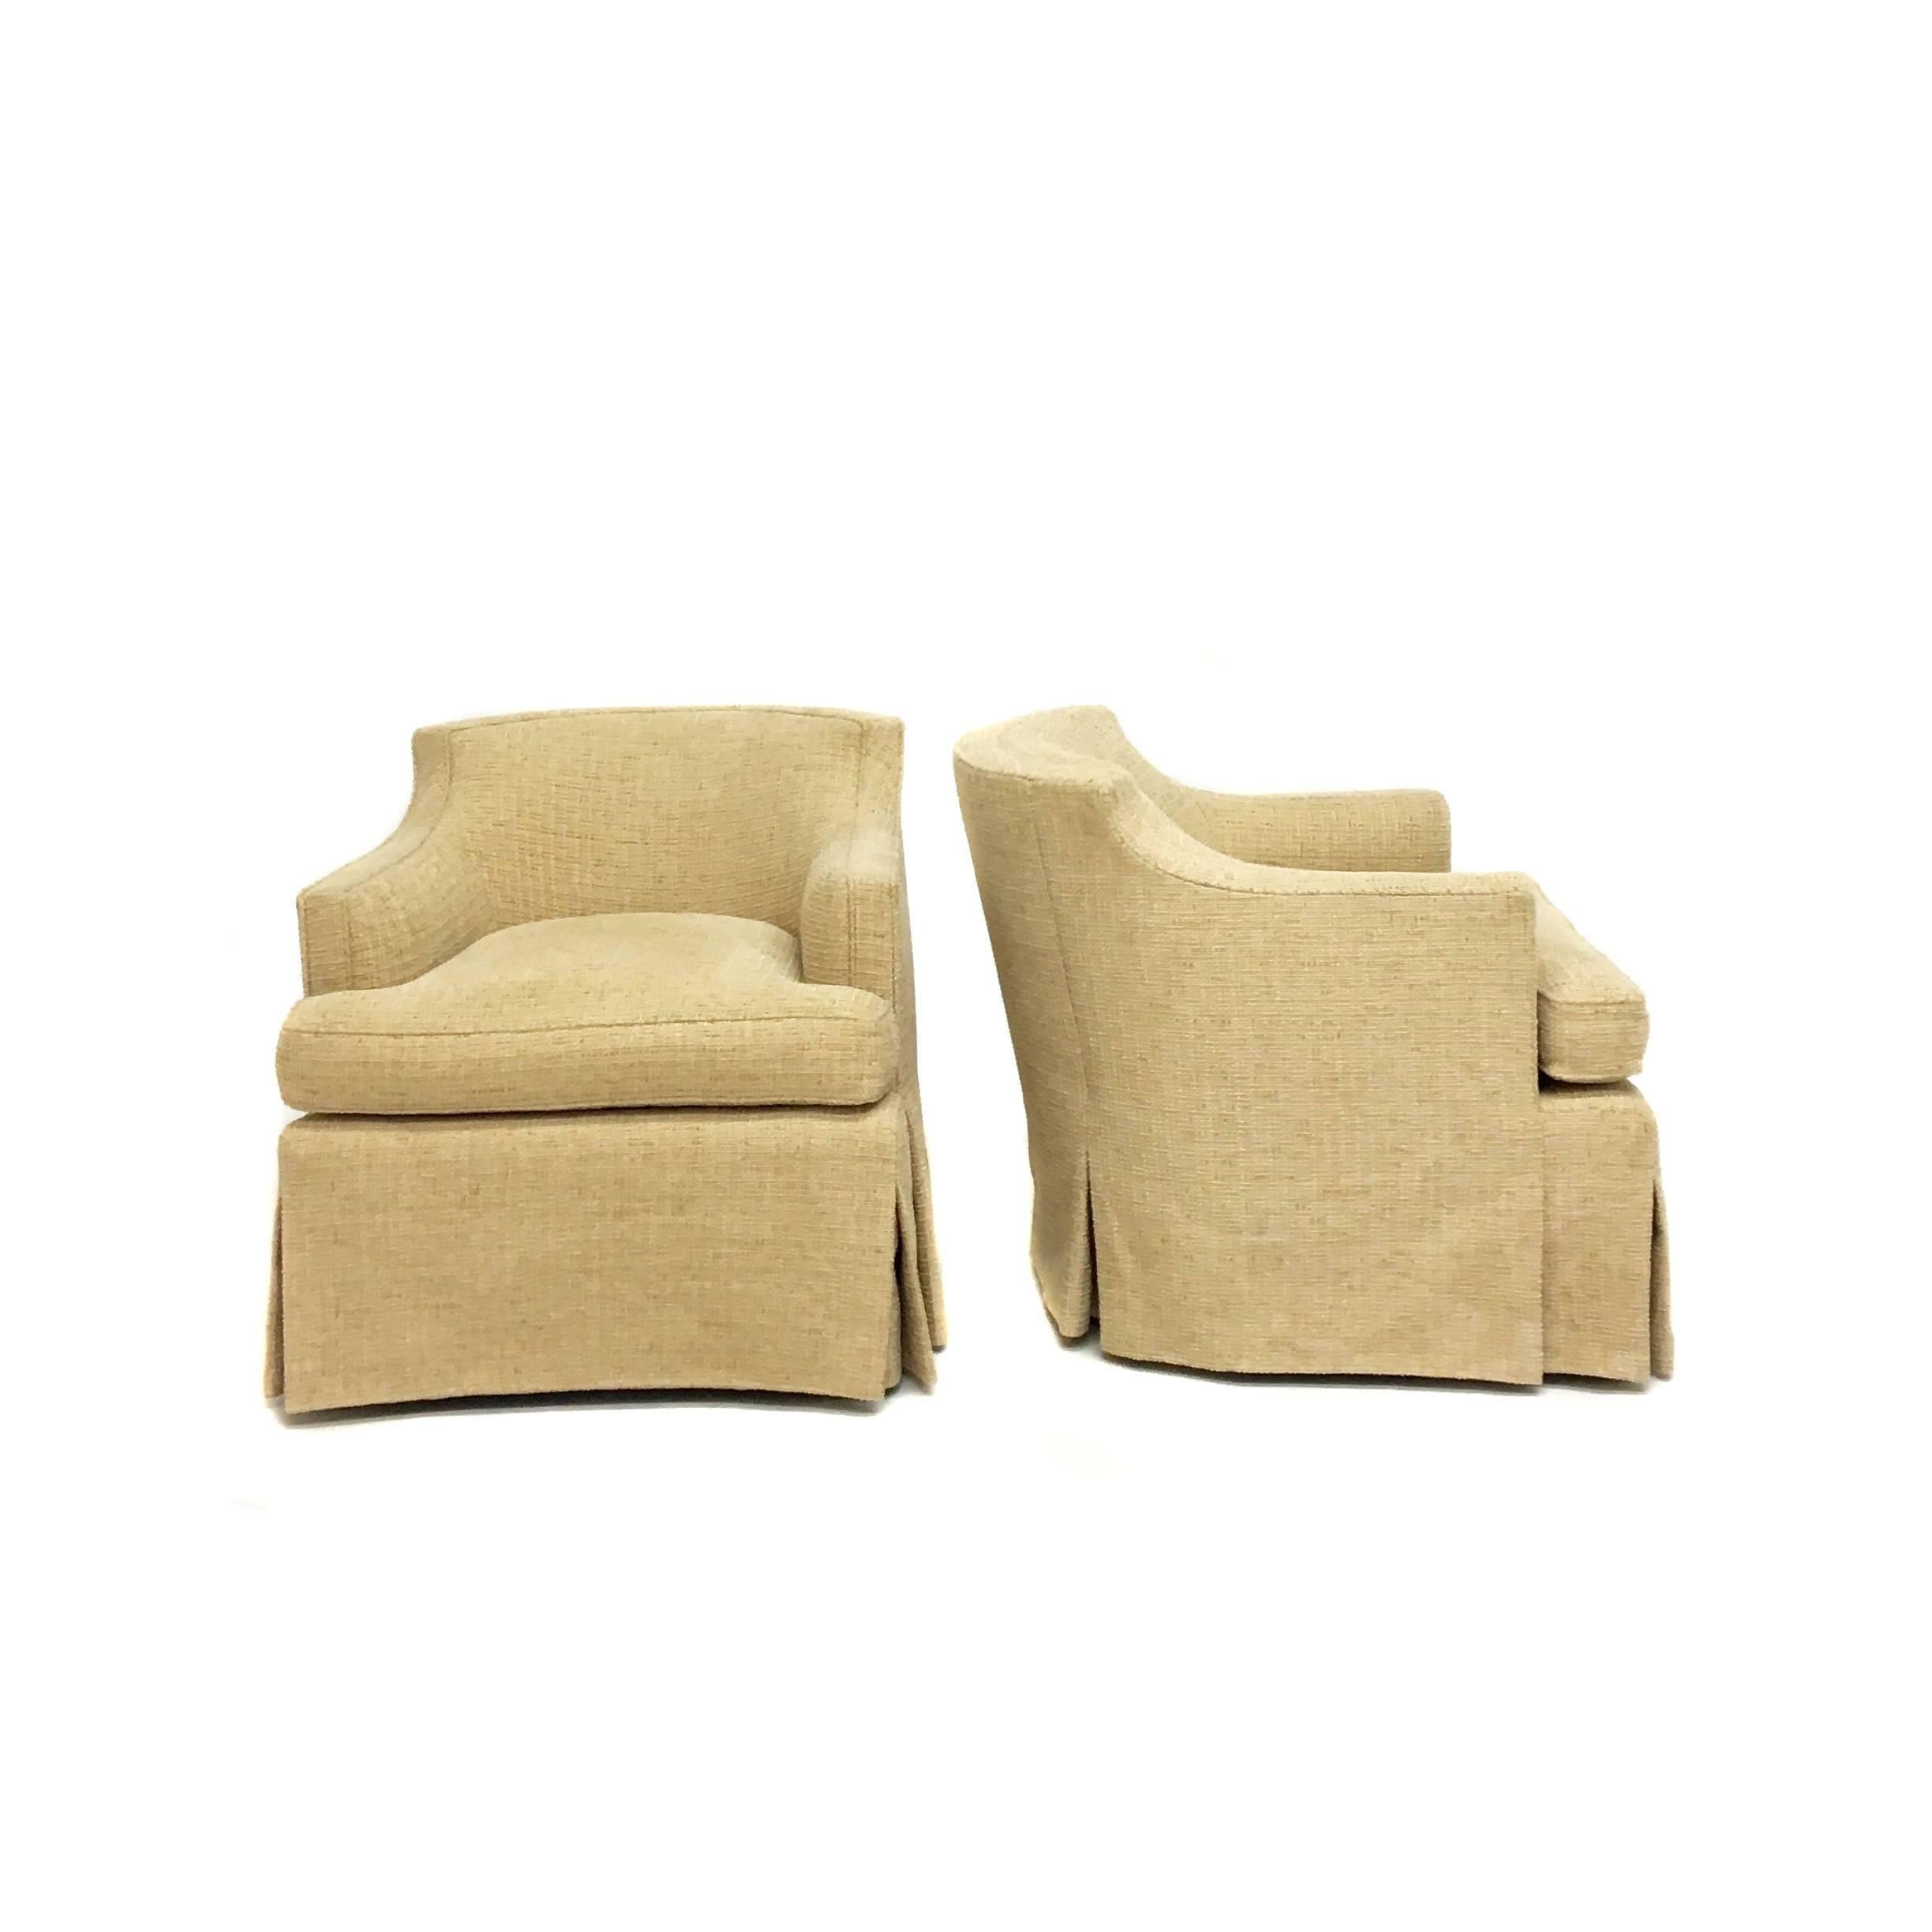 Woven chenille neutral swivel club chairs with pleated skirt and down foam seat. Profile of the chairs match, though the backs have slightly different pleating as seen in photo. Age appropriate wear. 

Measurements: 28